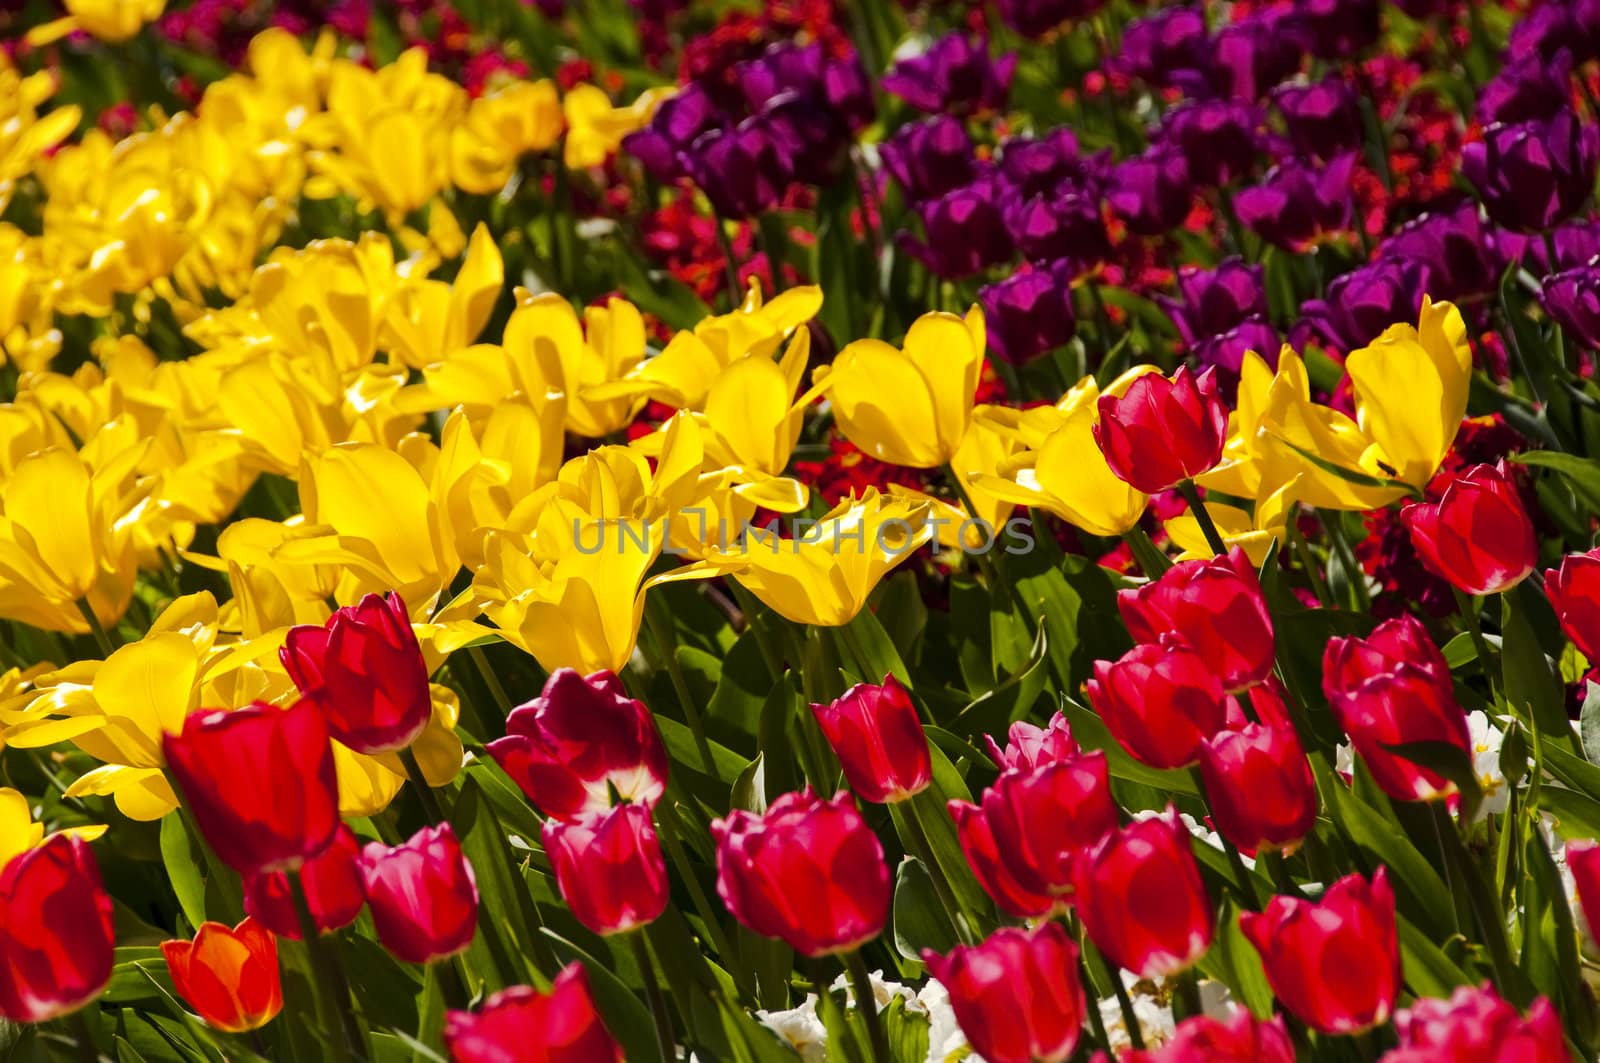 Red, yellow and purple tulips in a garden